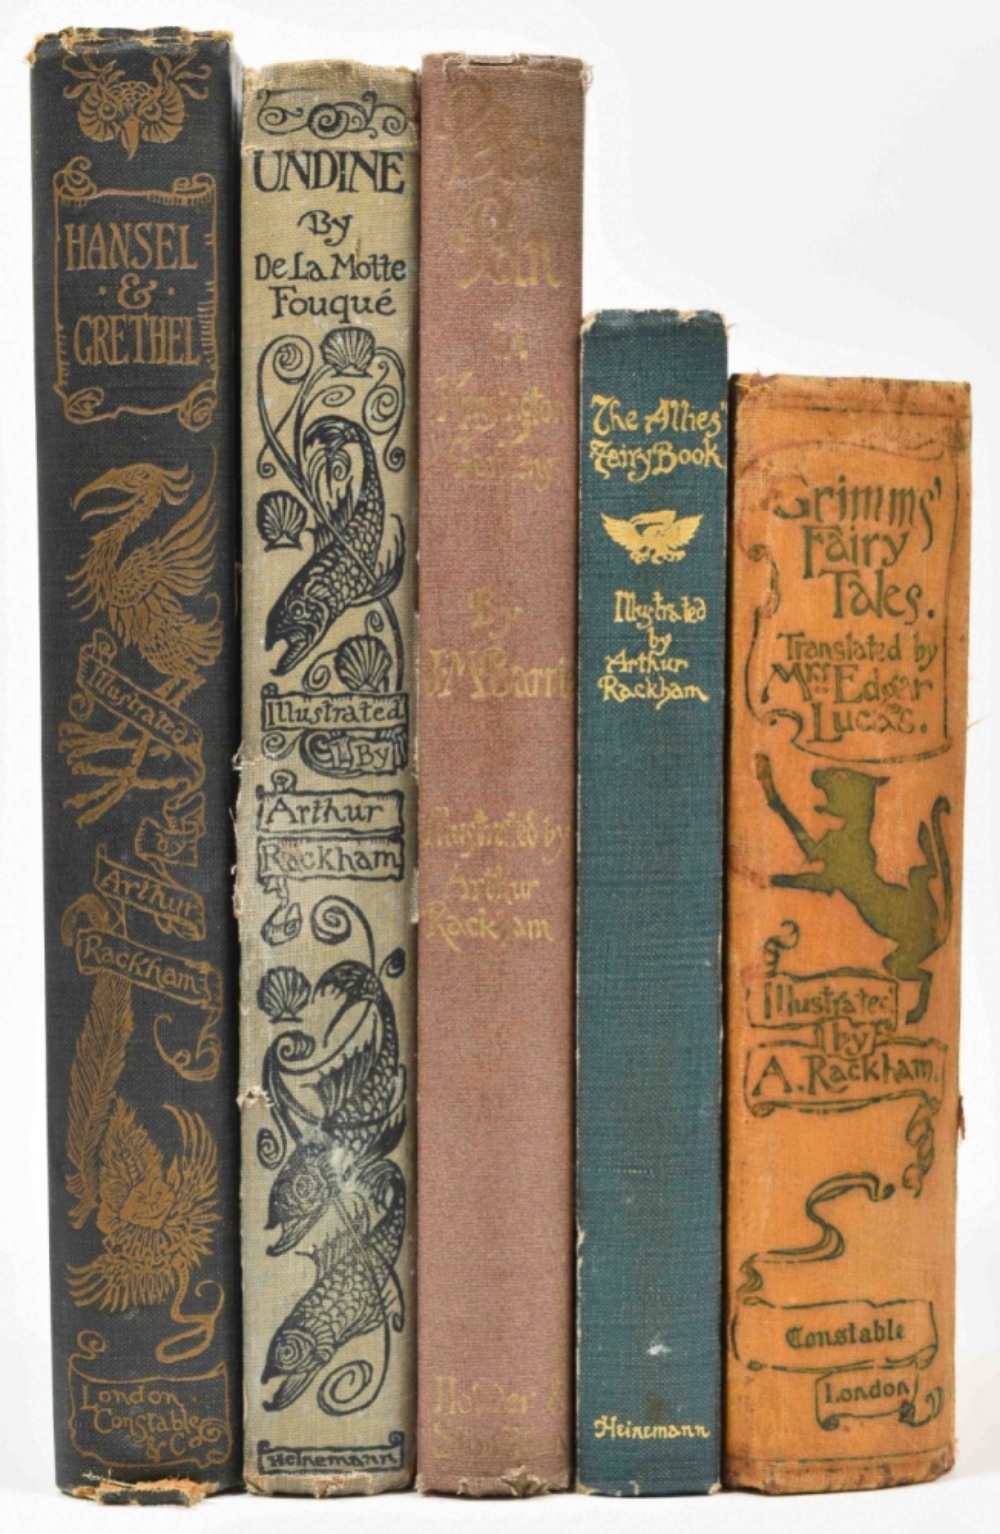 Five titles: Hansel & Grethel & other tales by the Brothers Grimm